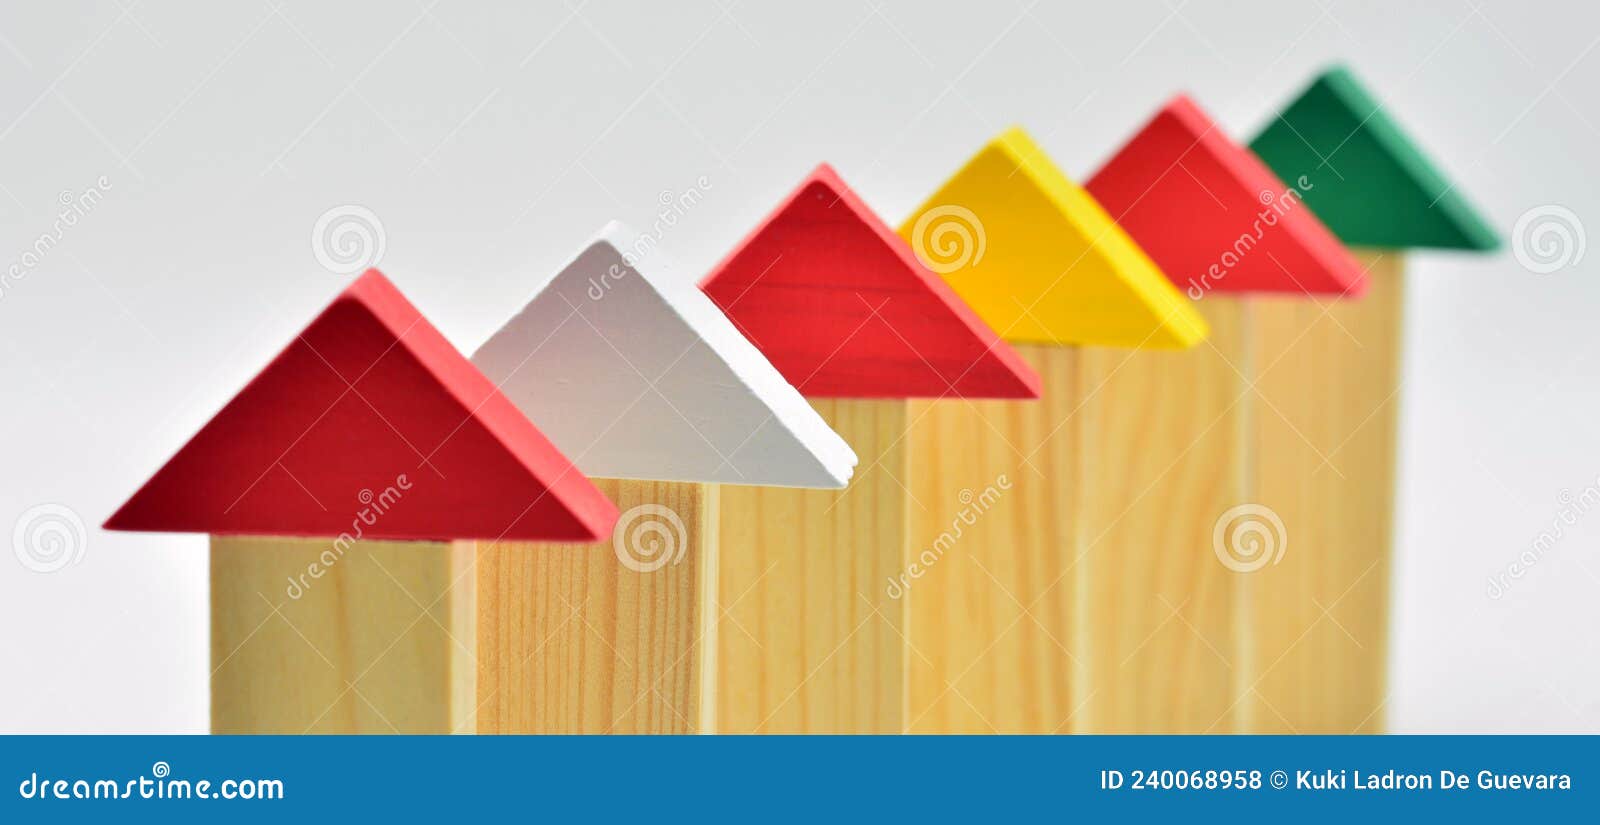 houses made with wooden blocks in a row